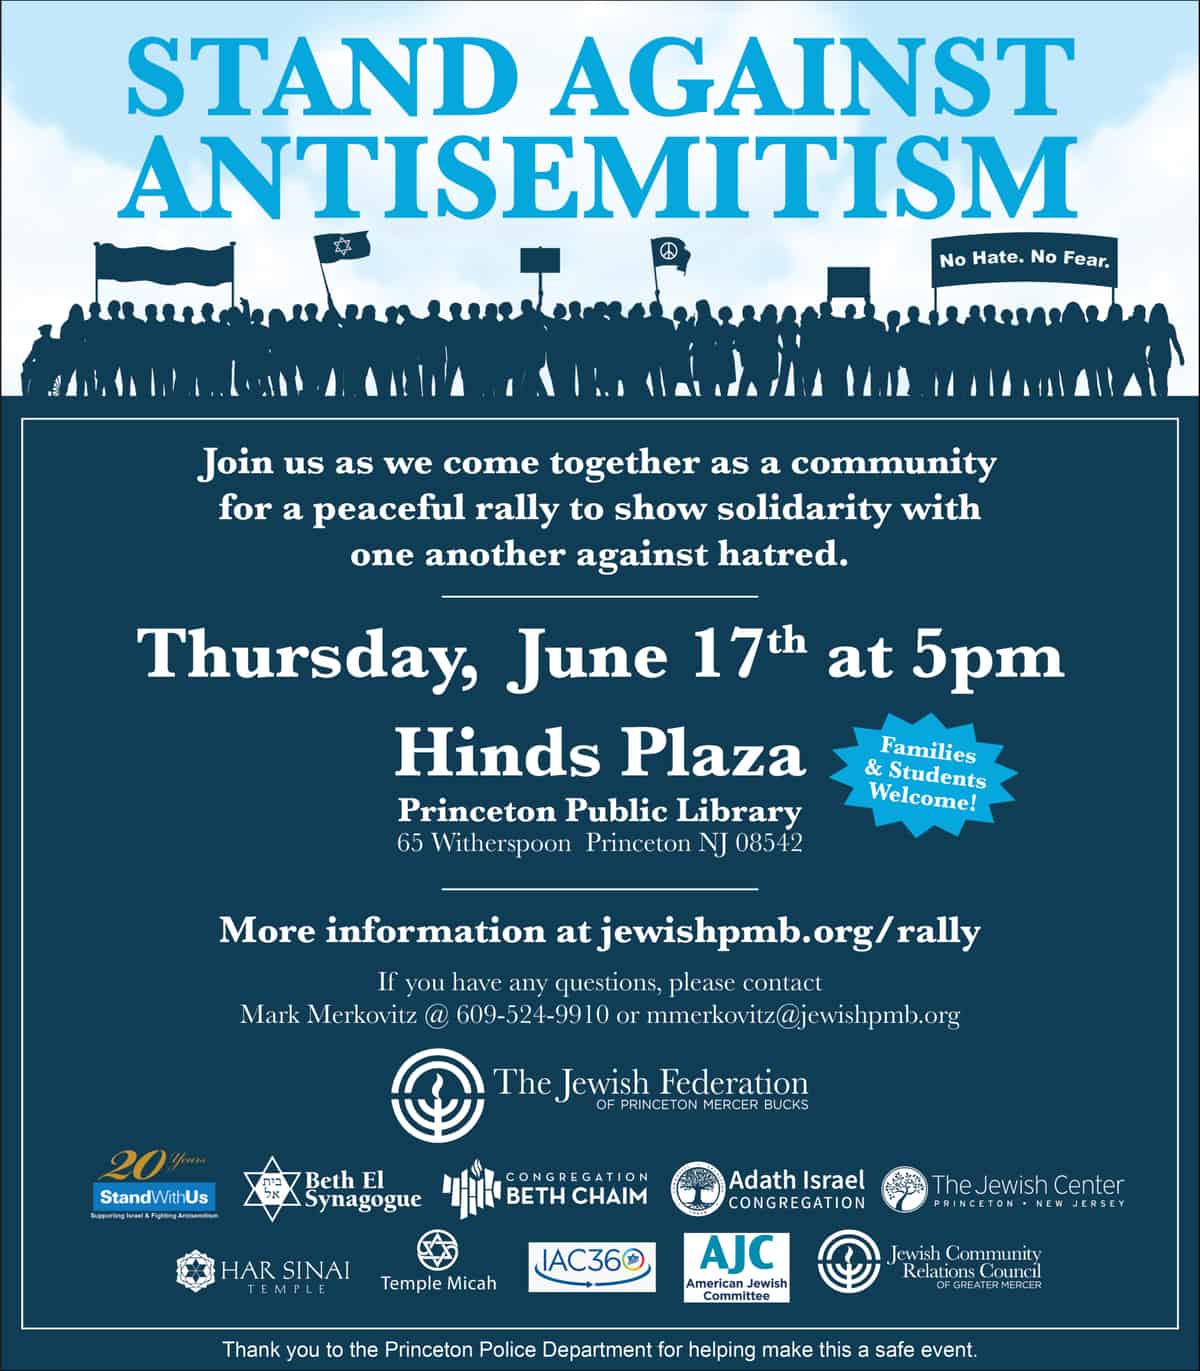 Jewish groups to hold rally against antisemitism in Princeton Thursday